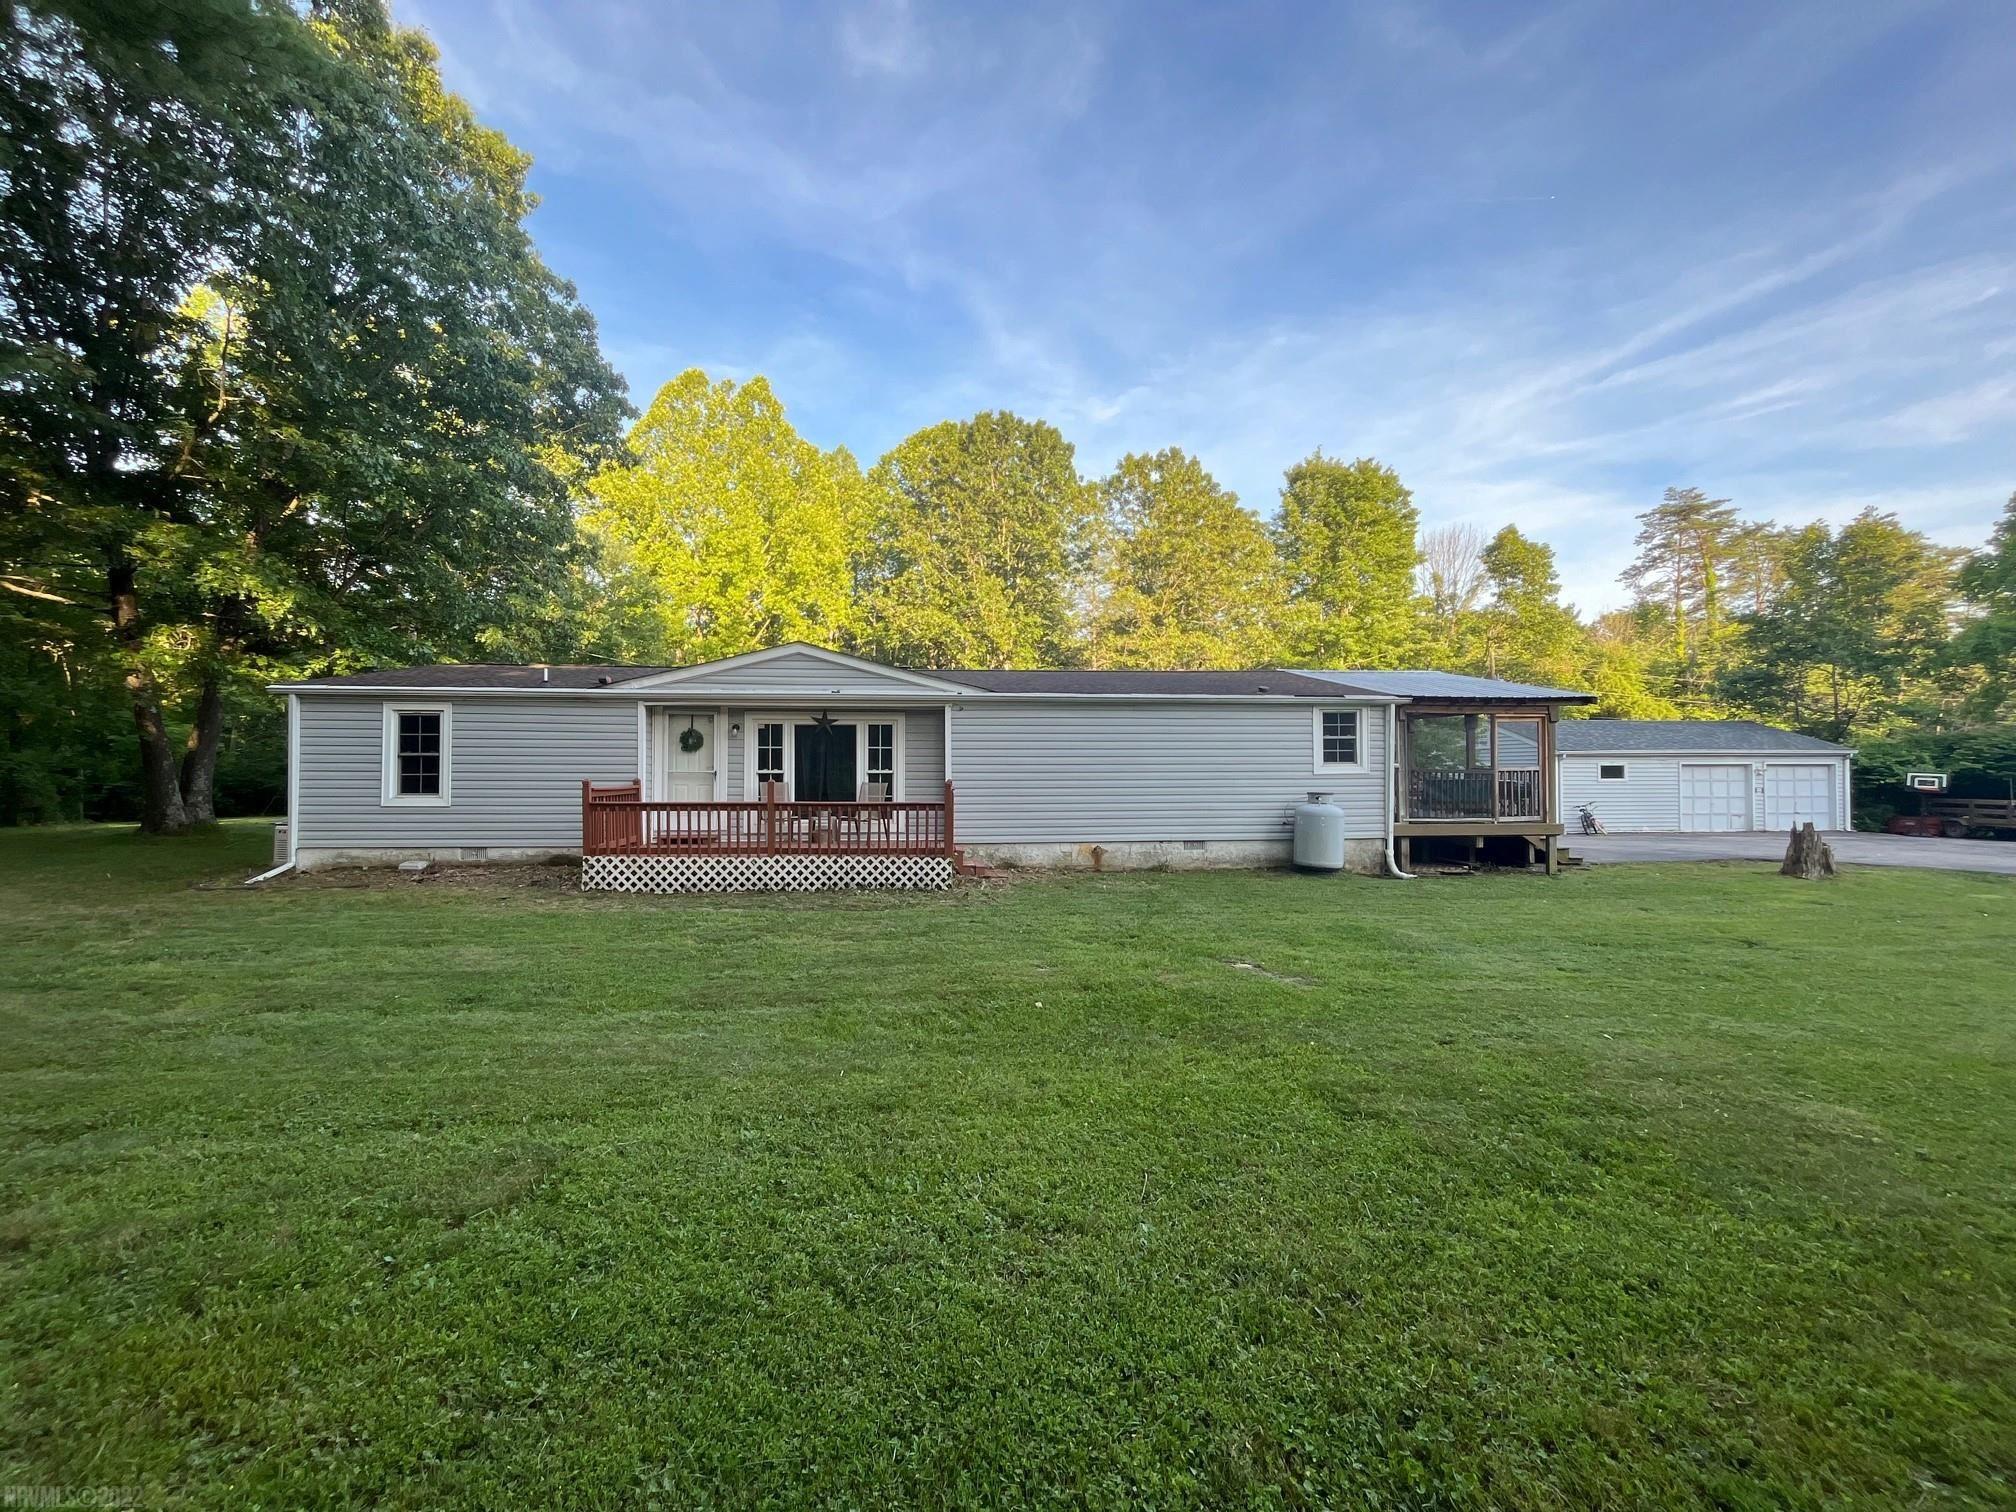 This 3 Bedroom/2 Bath Home detached garage & 12x30 building, garden space, green house & chicken coop. All on over 7 acres! Beautiful country setting with pond & gazebo! above ground swimming pool, Come relax at this peaceful get away! Also whole house generator installed in 2016 you will never have to leave! Other features include 1850 Sq.Ft. of Living Space. Nice sunroom, some new flooring, new well pump in 2021, new dishwasher in 2020, new electrical panel box in 2021, new flu for wood stove in 2022, Centrally Located to Roanoke Valley and the New River Valley.